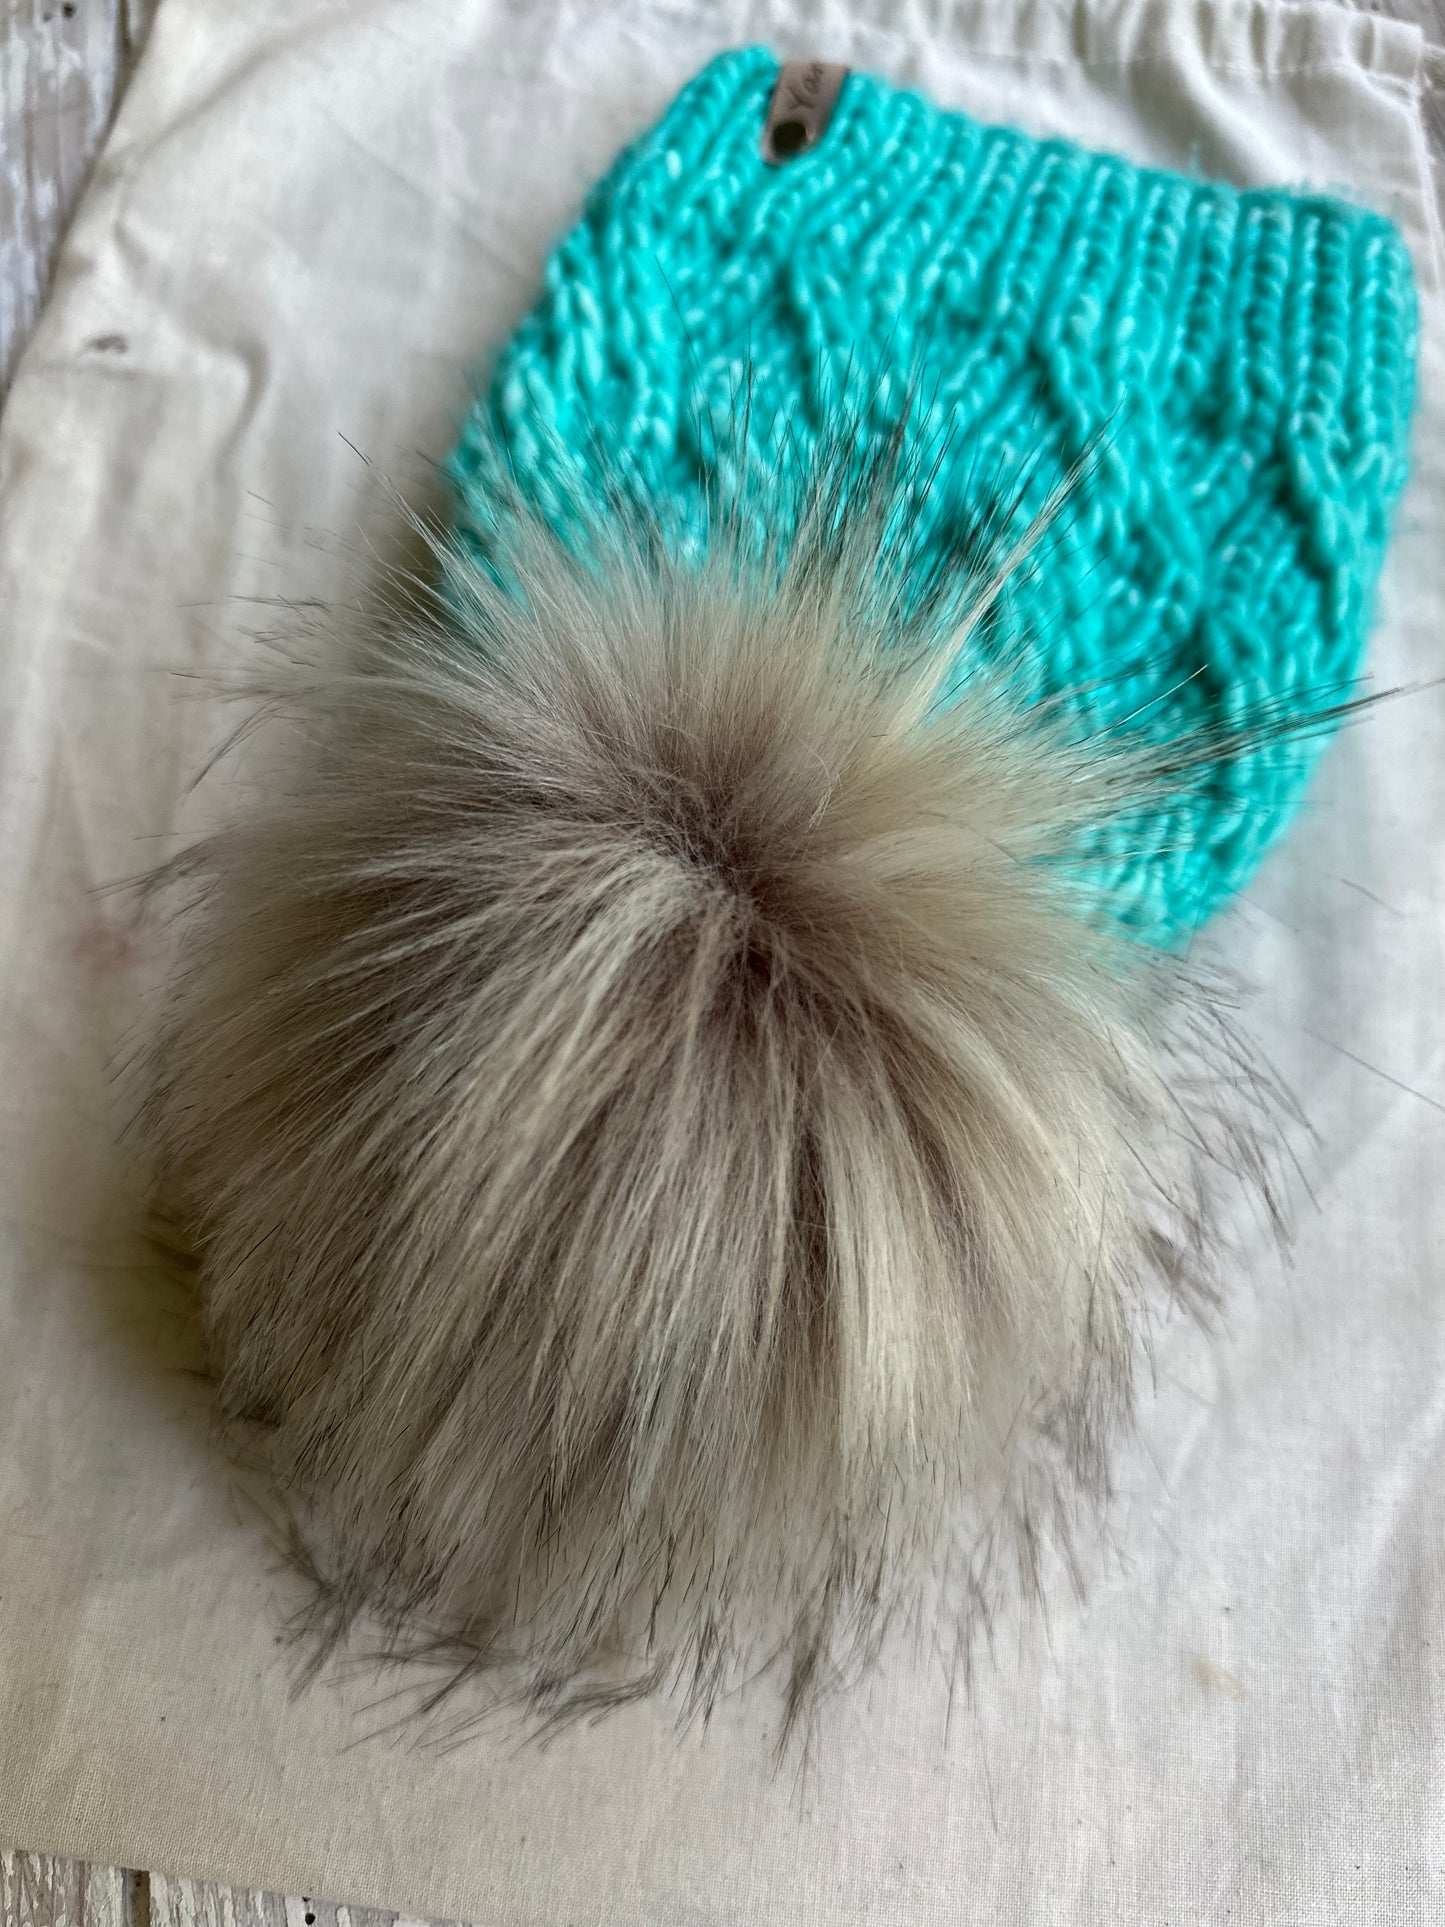 Toddler 1-3 yr Merino wool knit hat with faux fur Pom